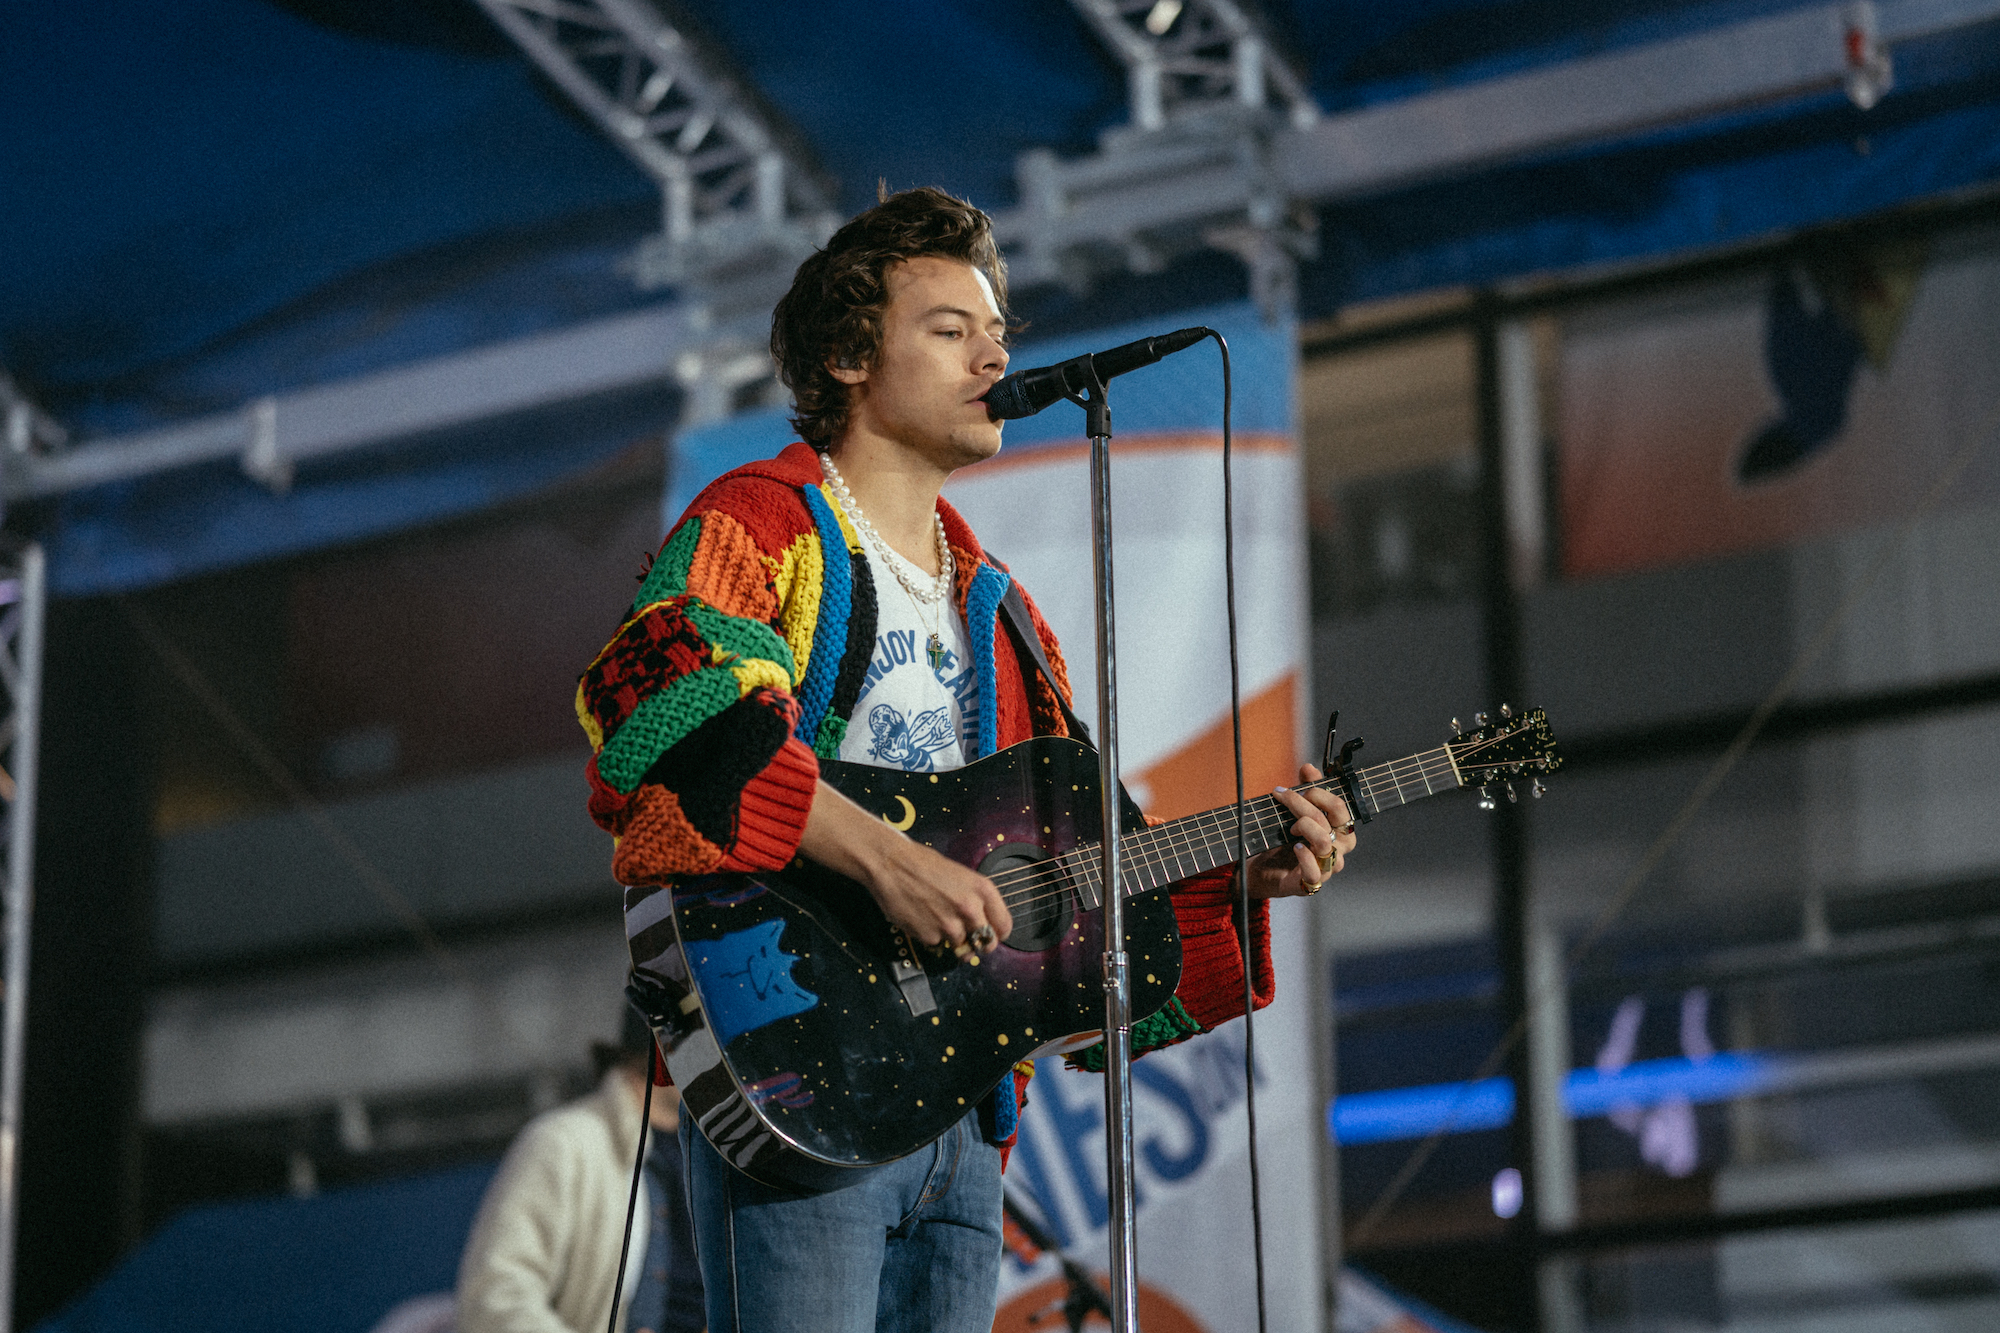 Harry Styles rehearsing for the Today Show on February 26, 2020